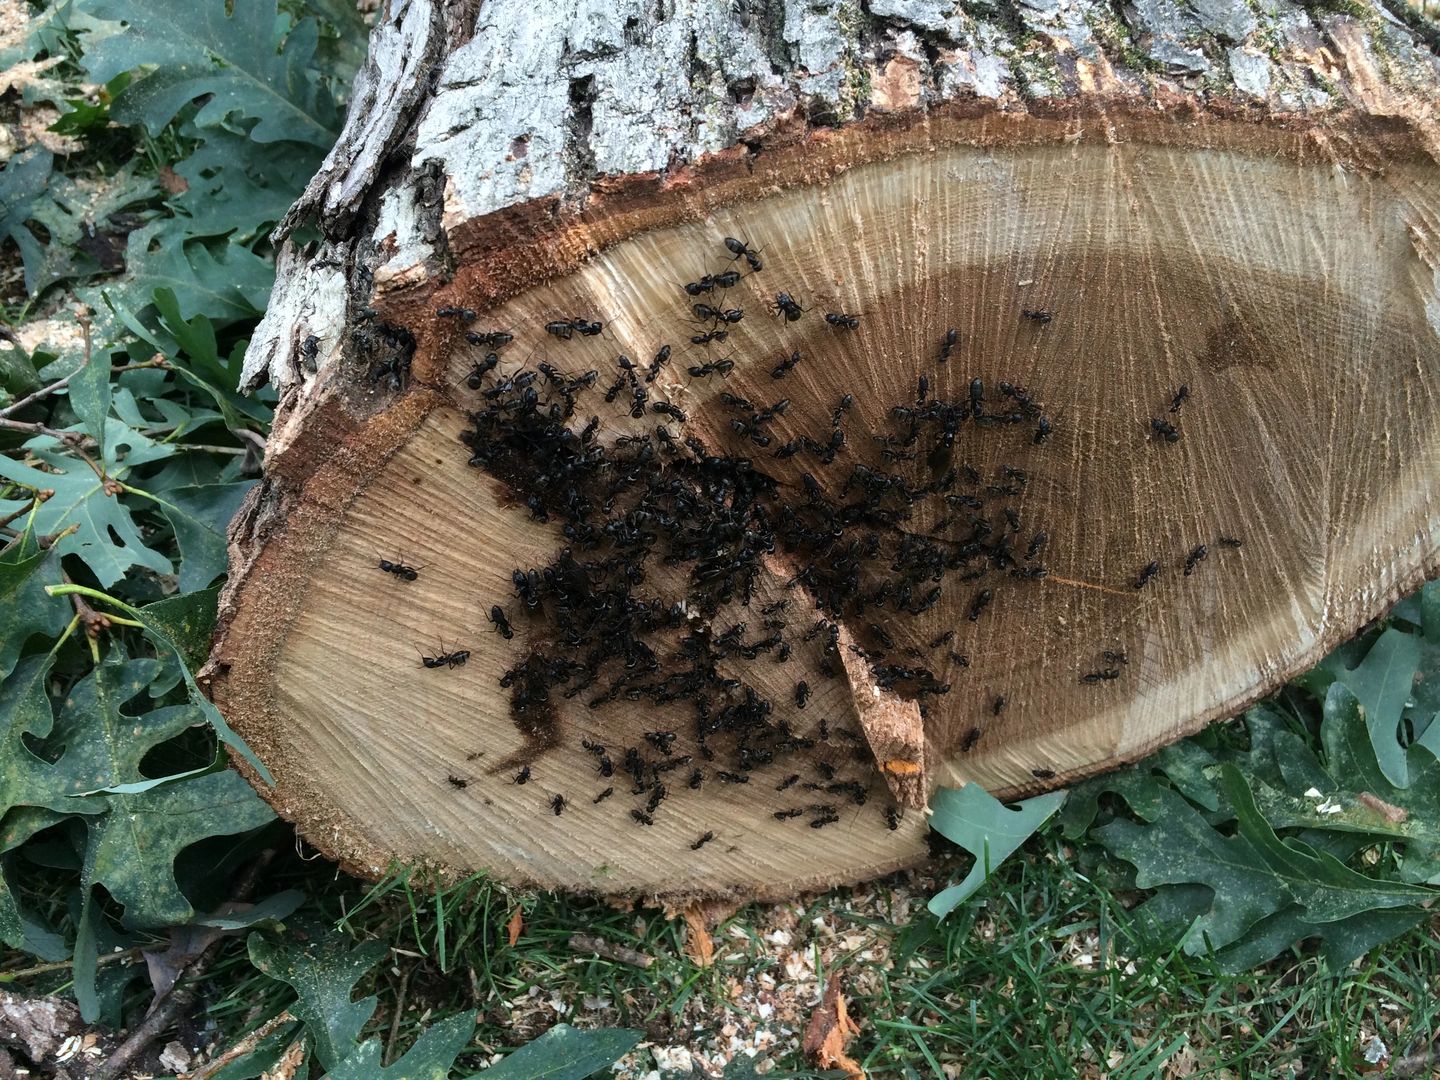 A tree log with many insects